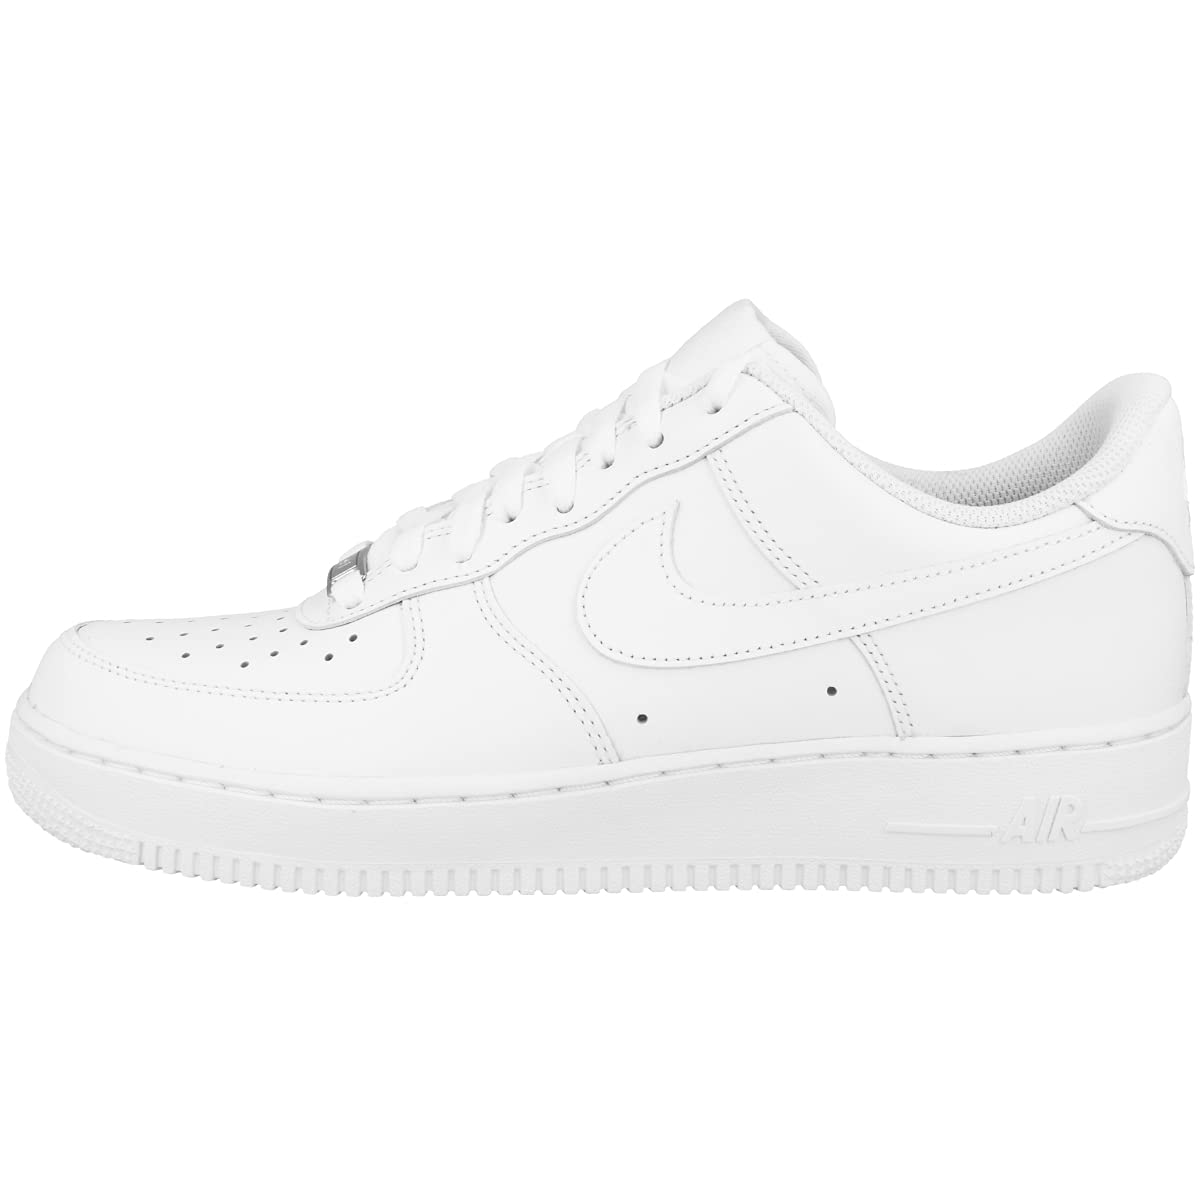 Nike Womens WMNS Air Force 1 '07 315115 112 White on White - Size 5W